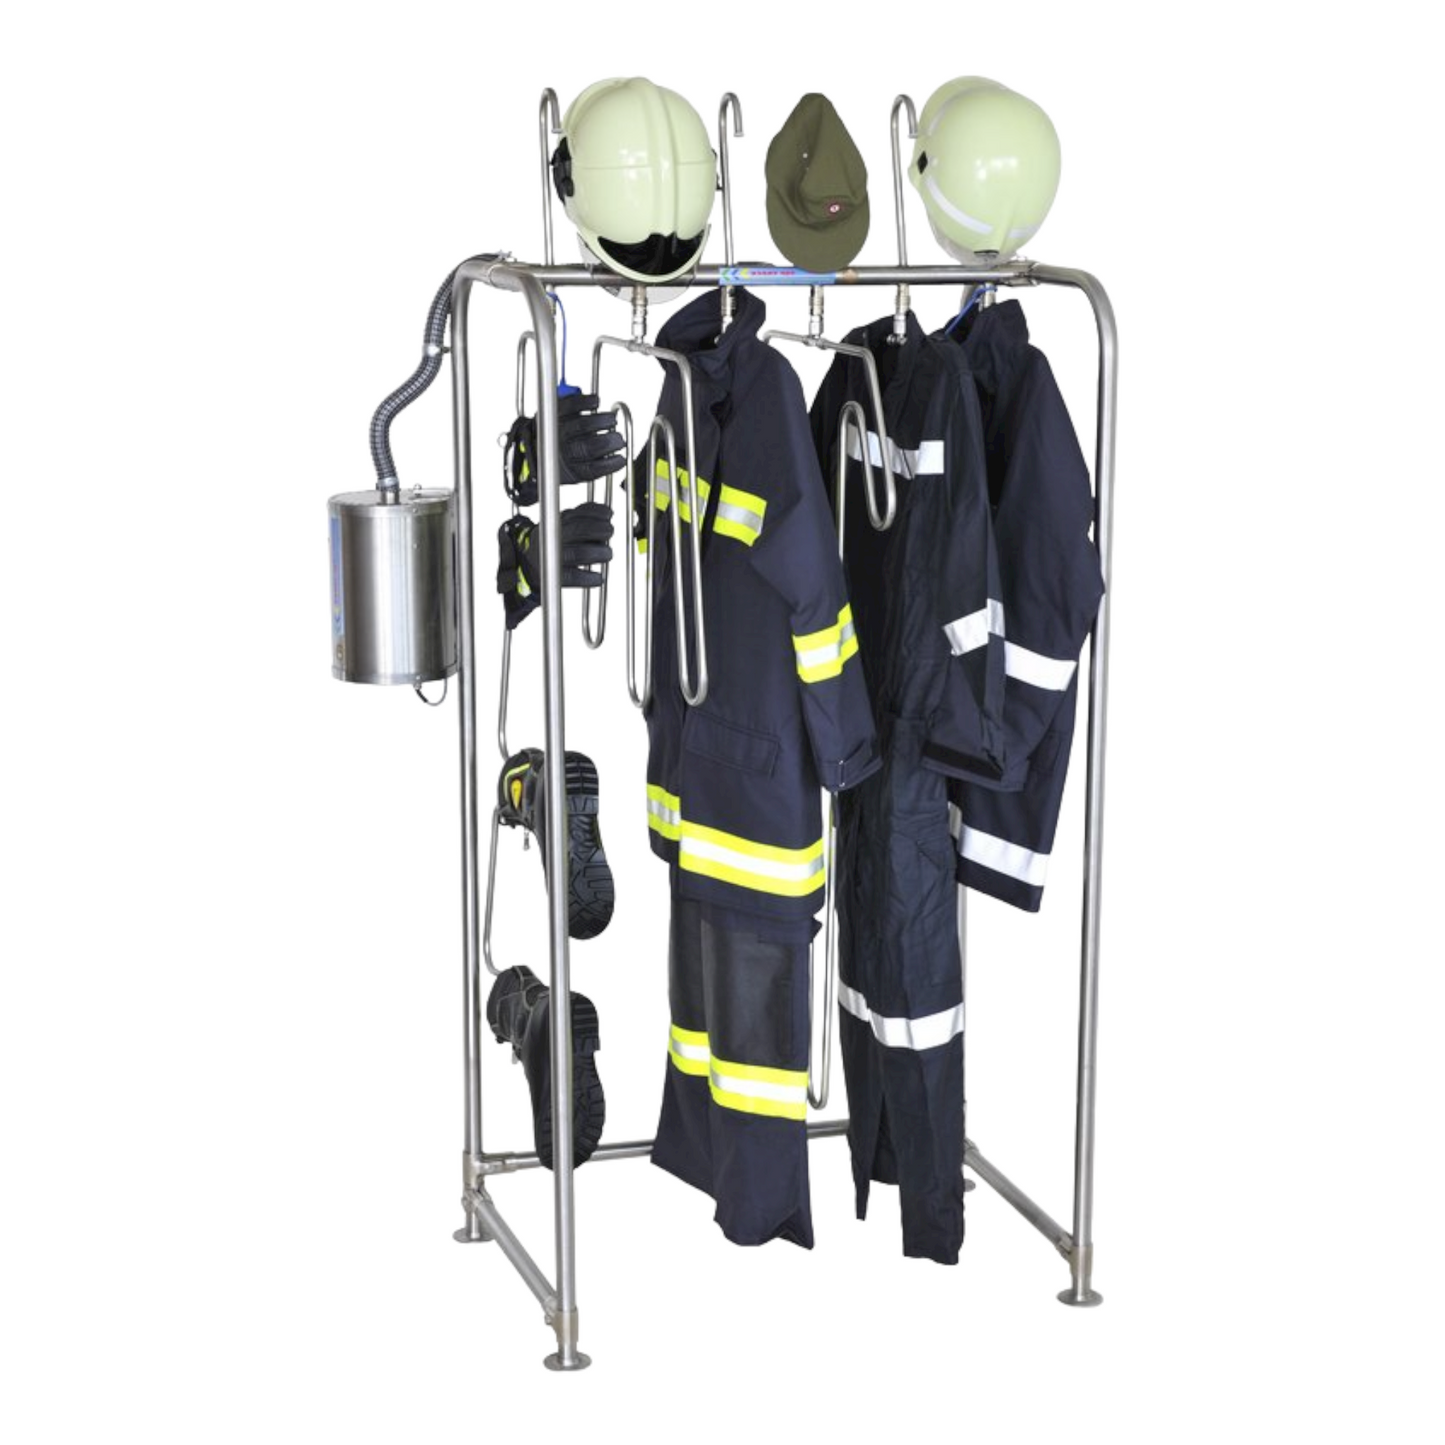 Combi 3 element drying system